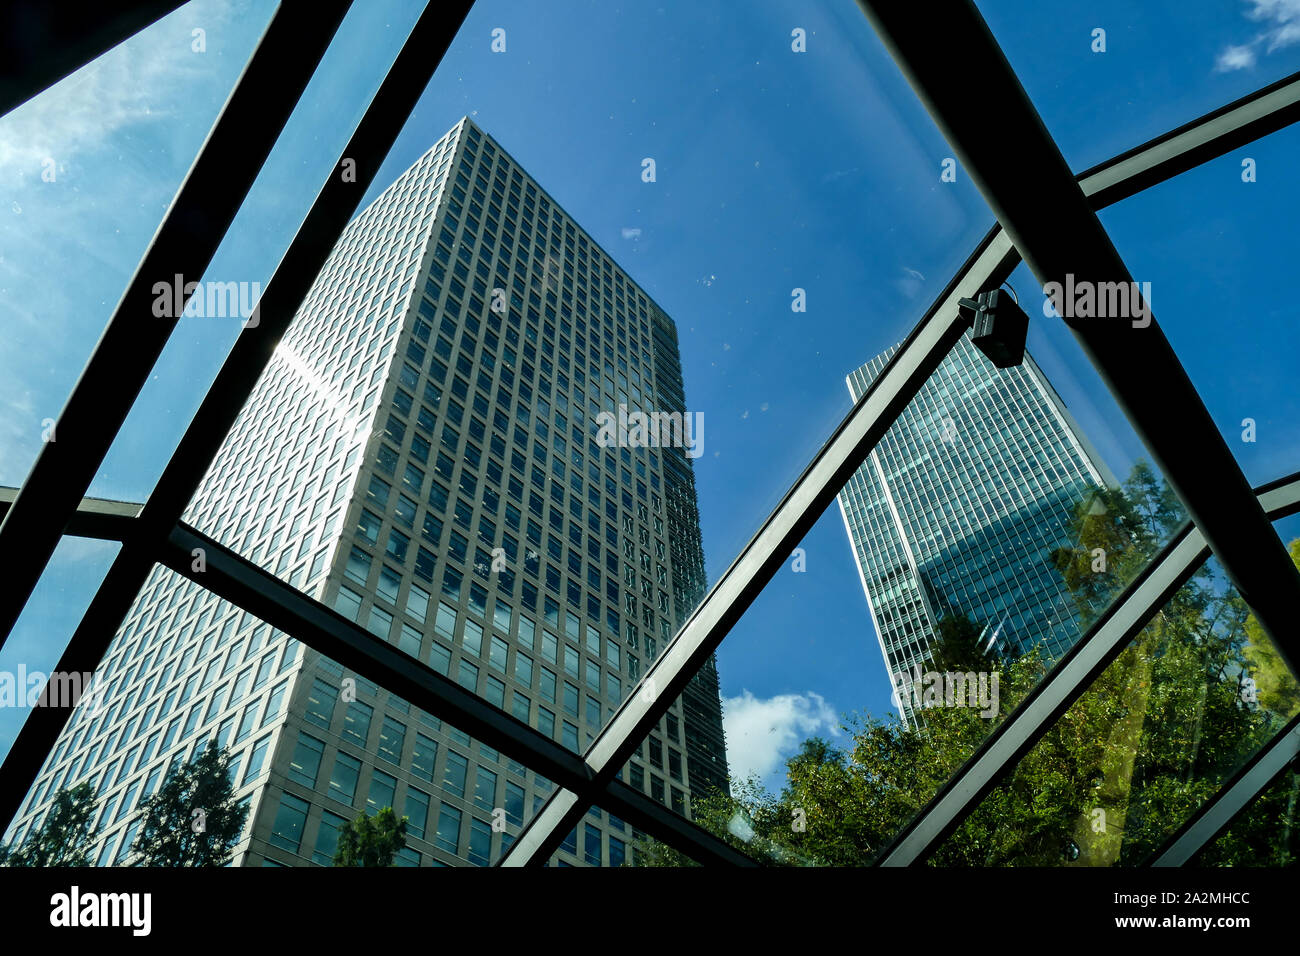 View from the roof garden with high rise office blocks dominate the skyline in Canary Wharf, the business center in the Isle of Dogs, London, Stock Photo